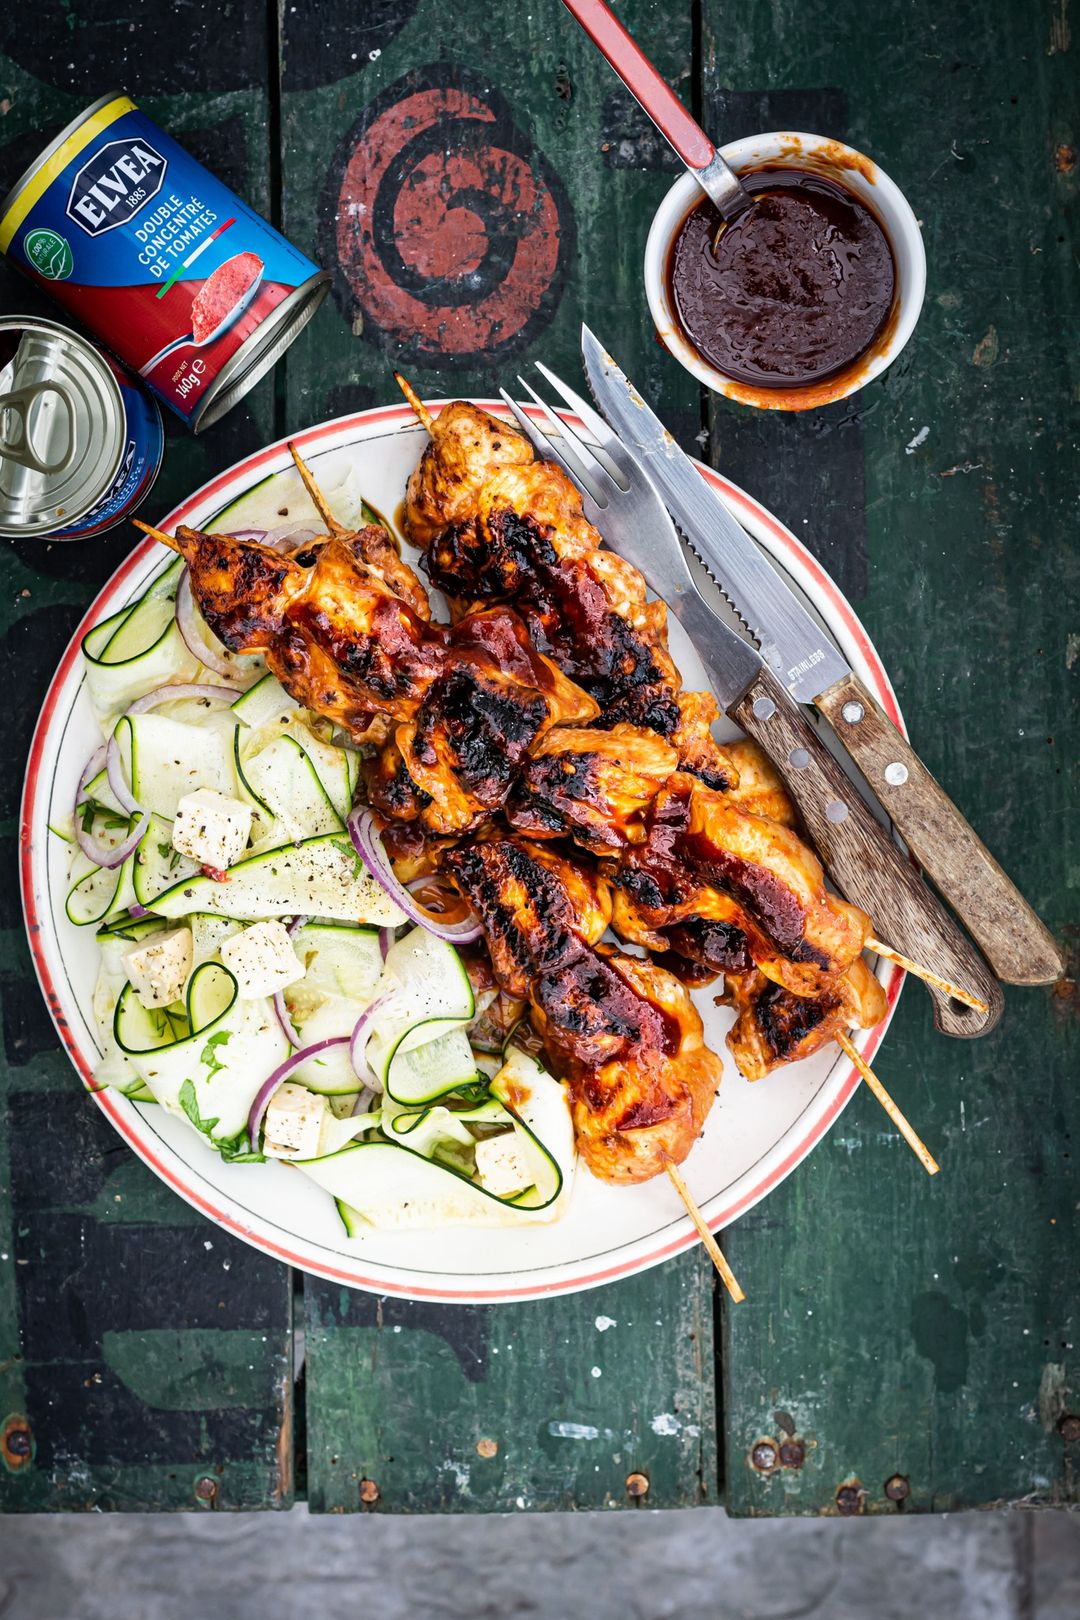 Barbecue sauce, chicken skewer and zucchini salad